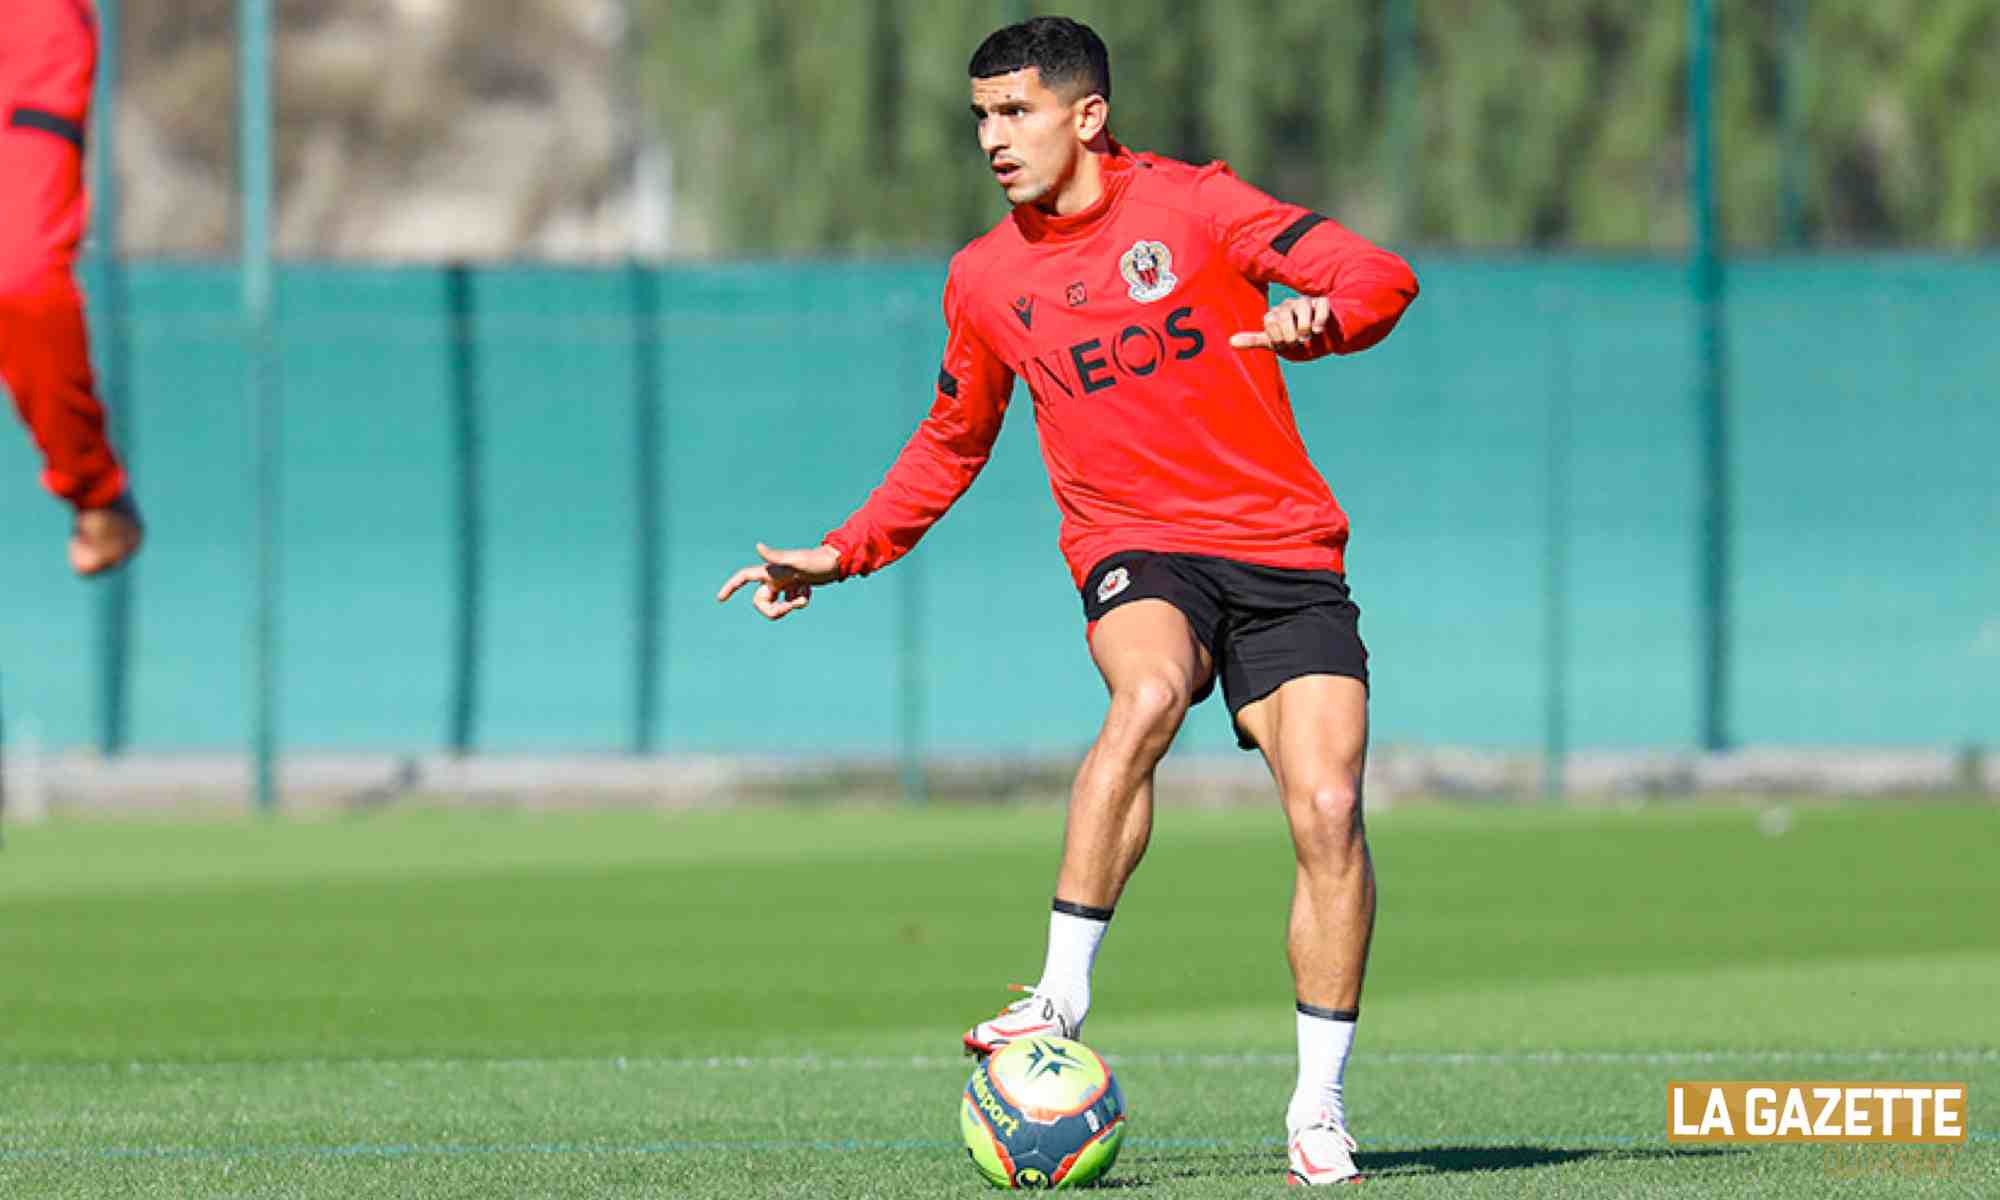 atal youcef ineos entrainement rouge